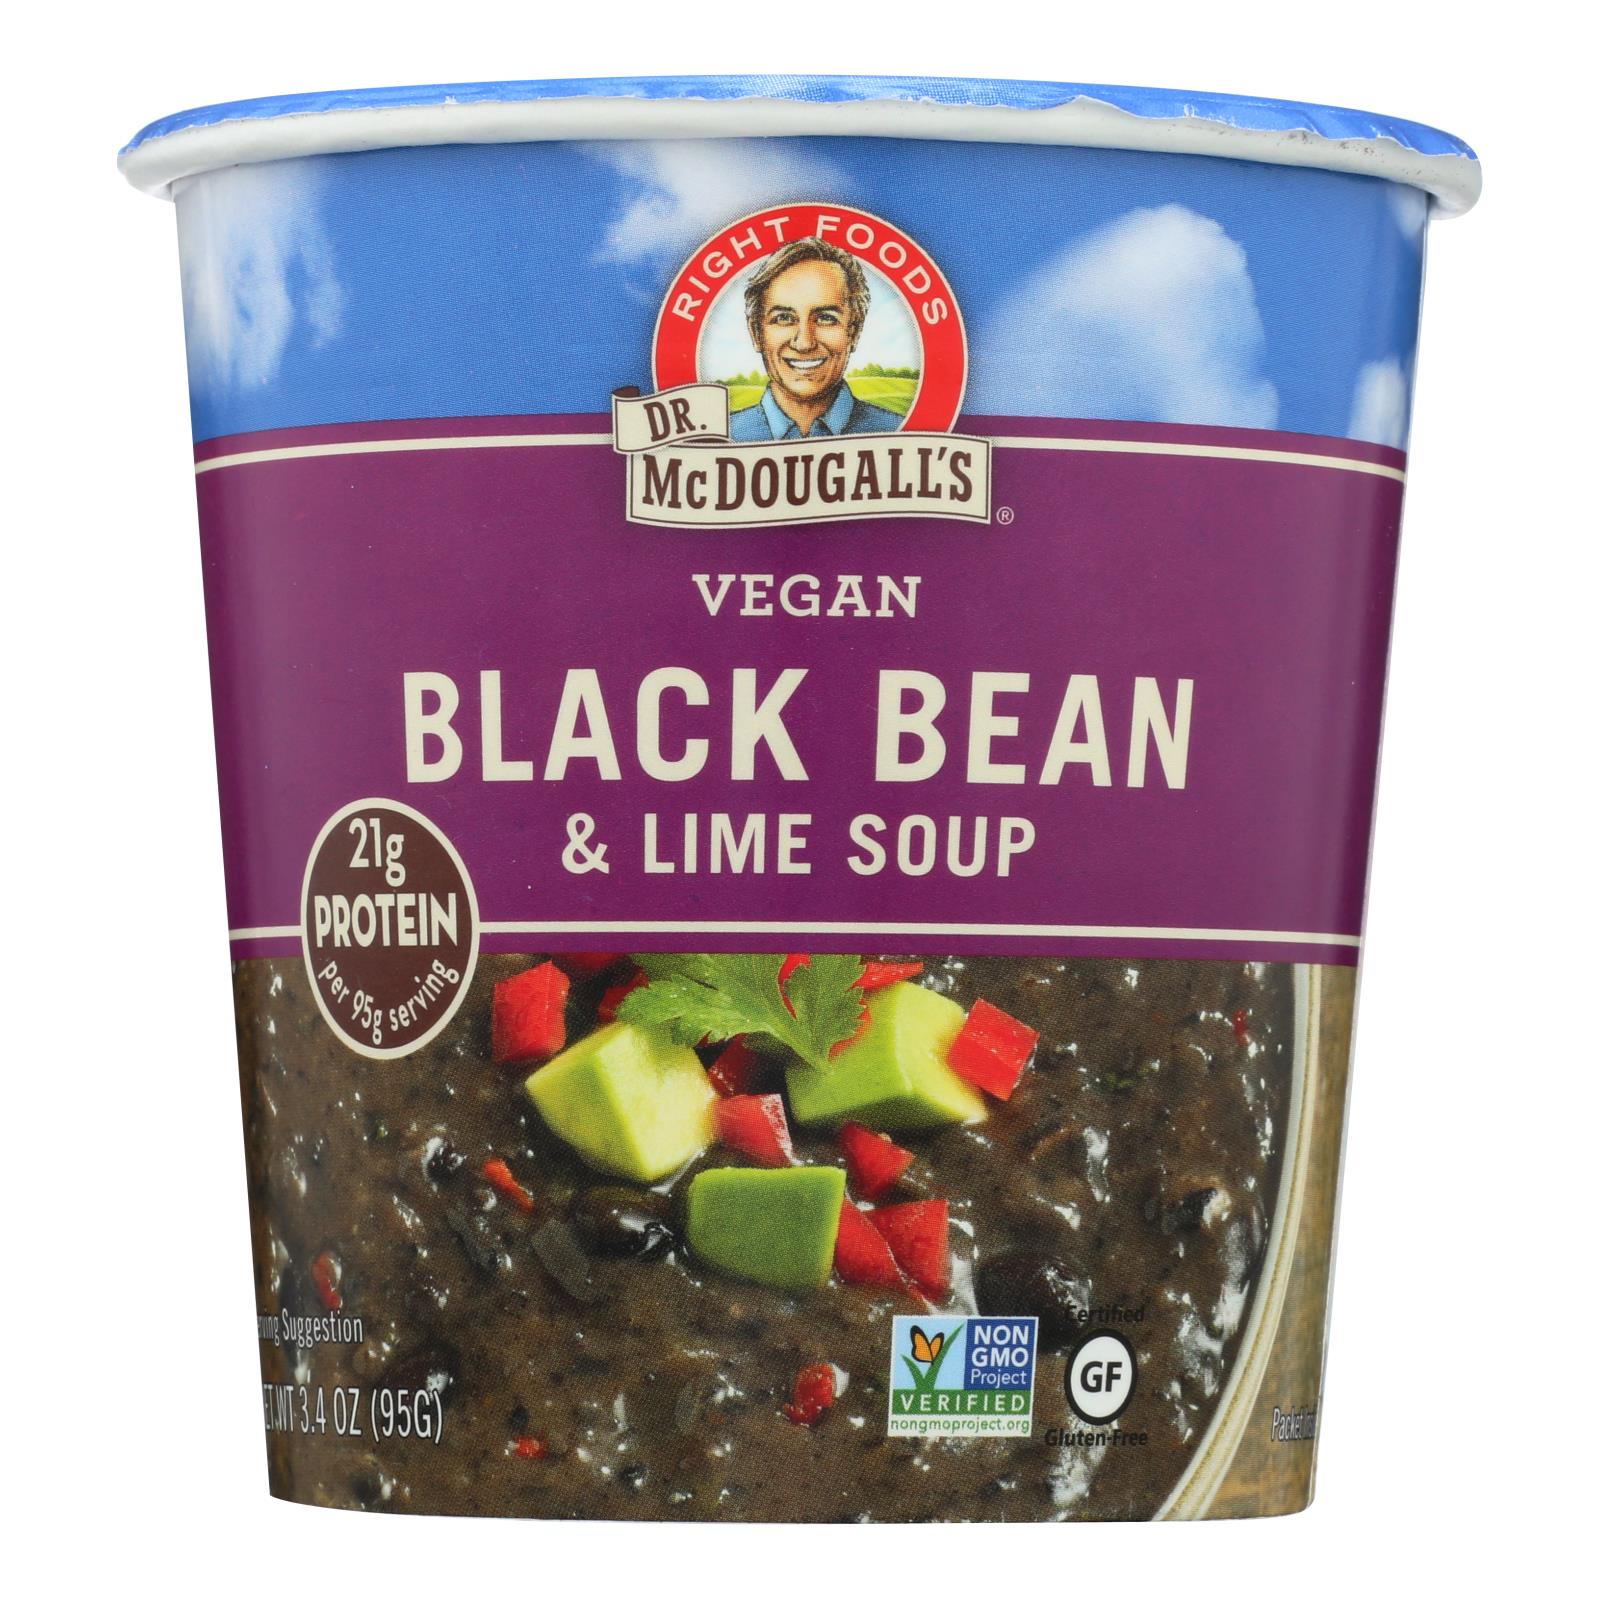 Dr. Mcdougall's Vegan Black Bean And Lime Soup Big Cup - Case Of 6 - 3.4 Oz. - Whole Green Foods